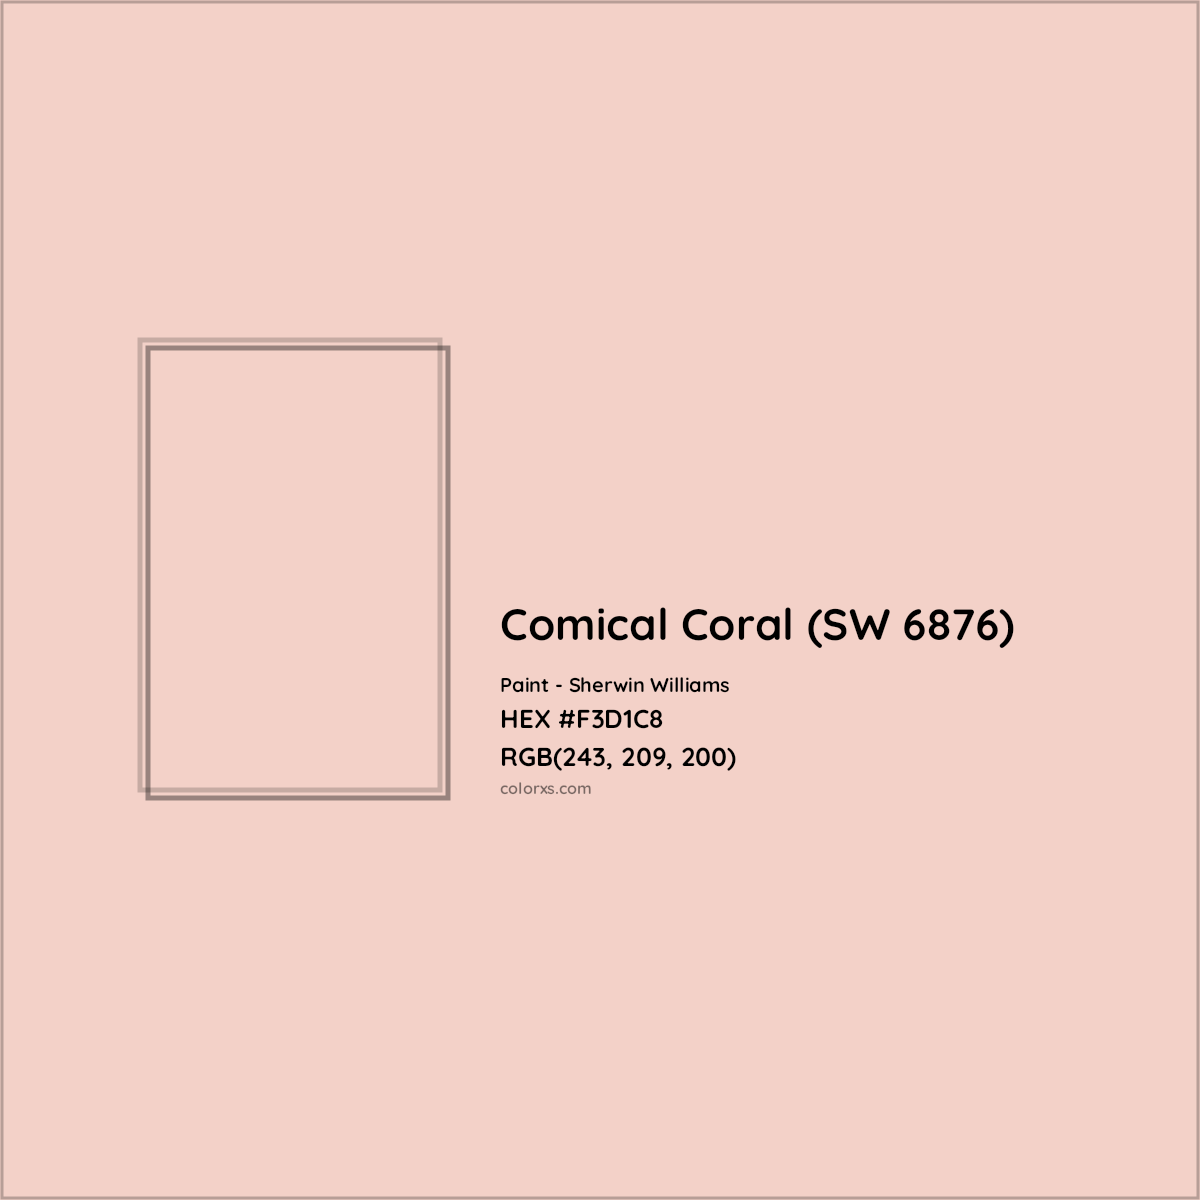 HEX #F3D1C8 Comical Coral (SW 6876) Paint Sherwin Williams - Color Code